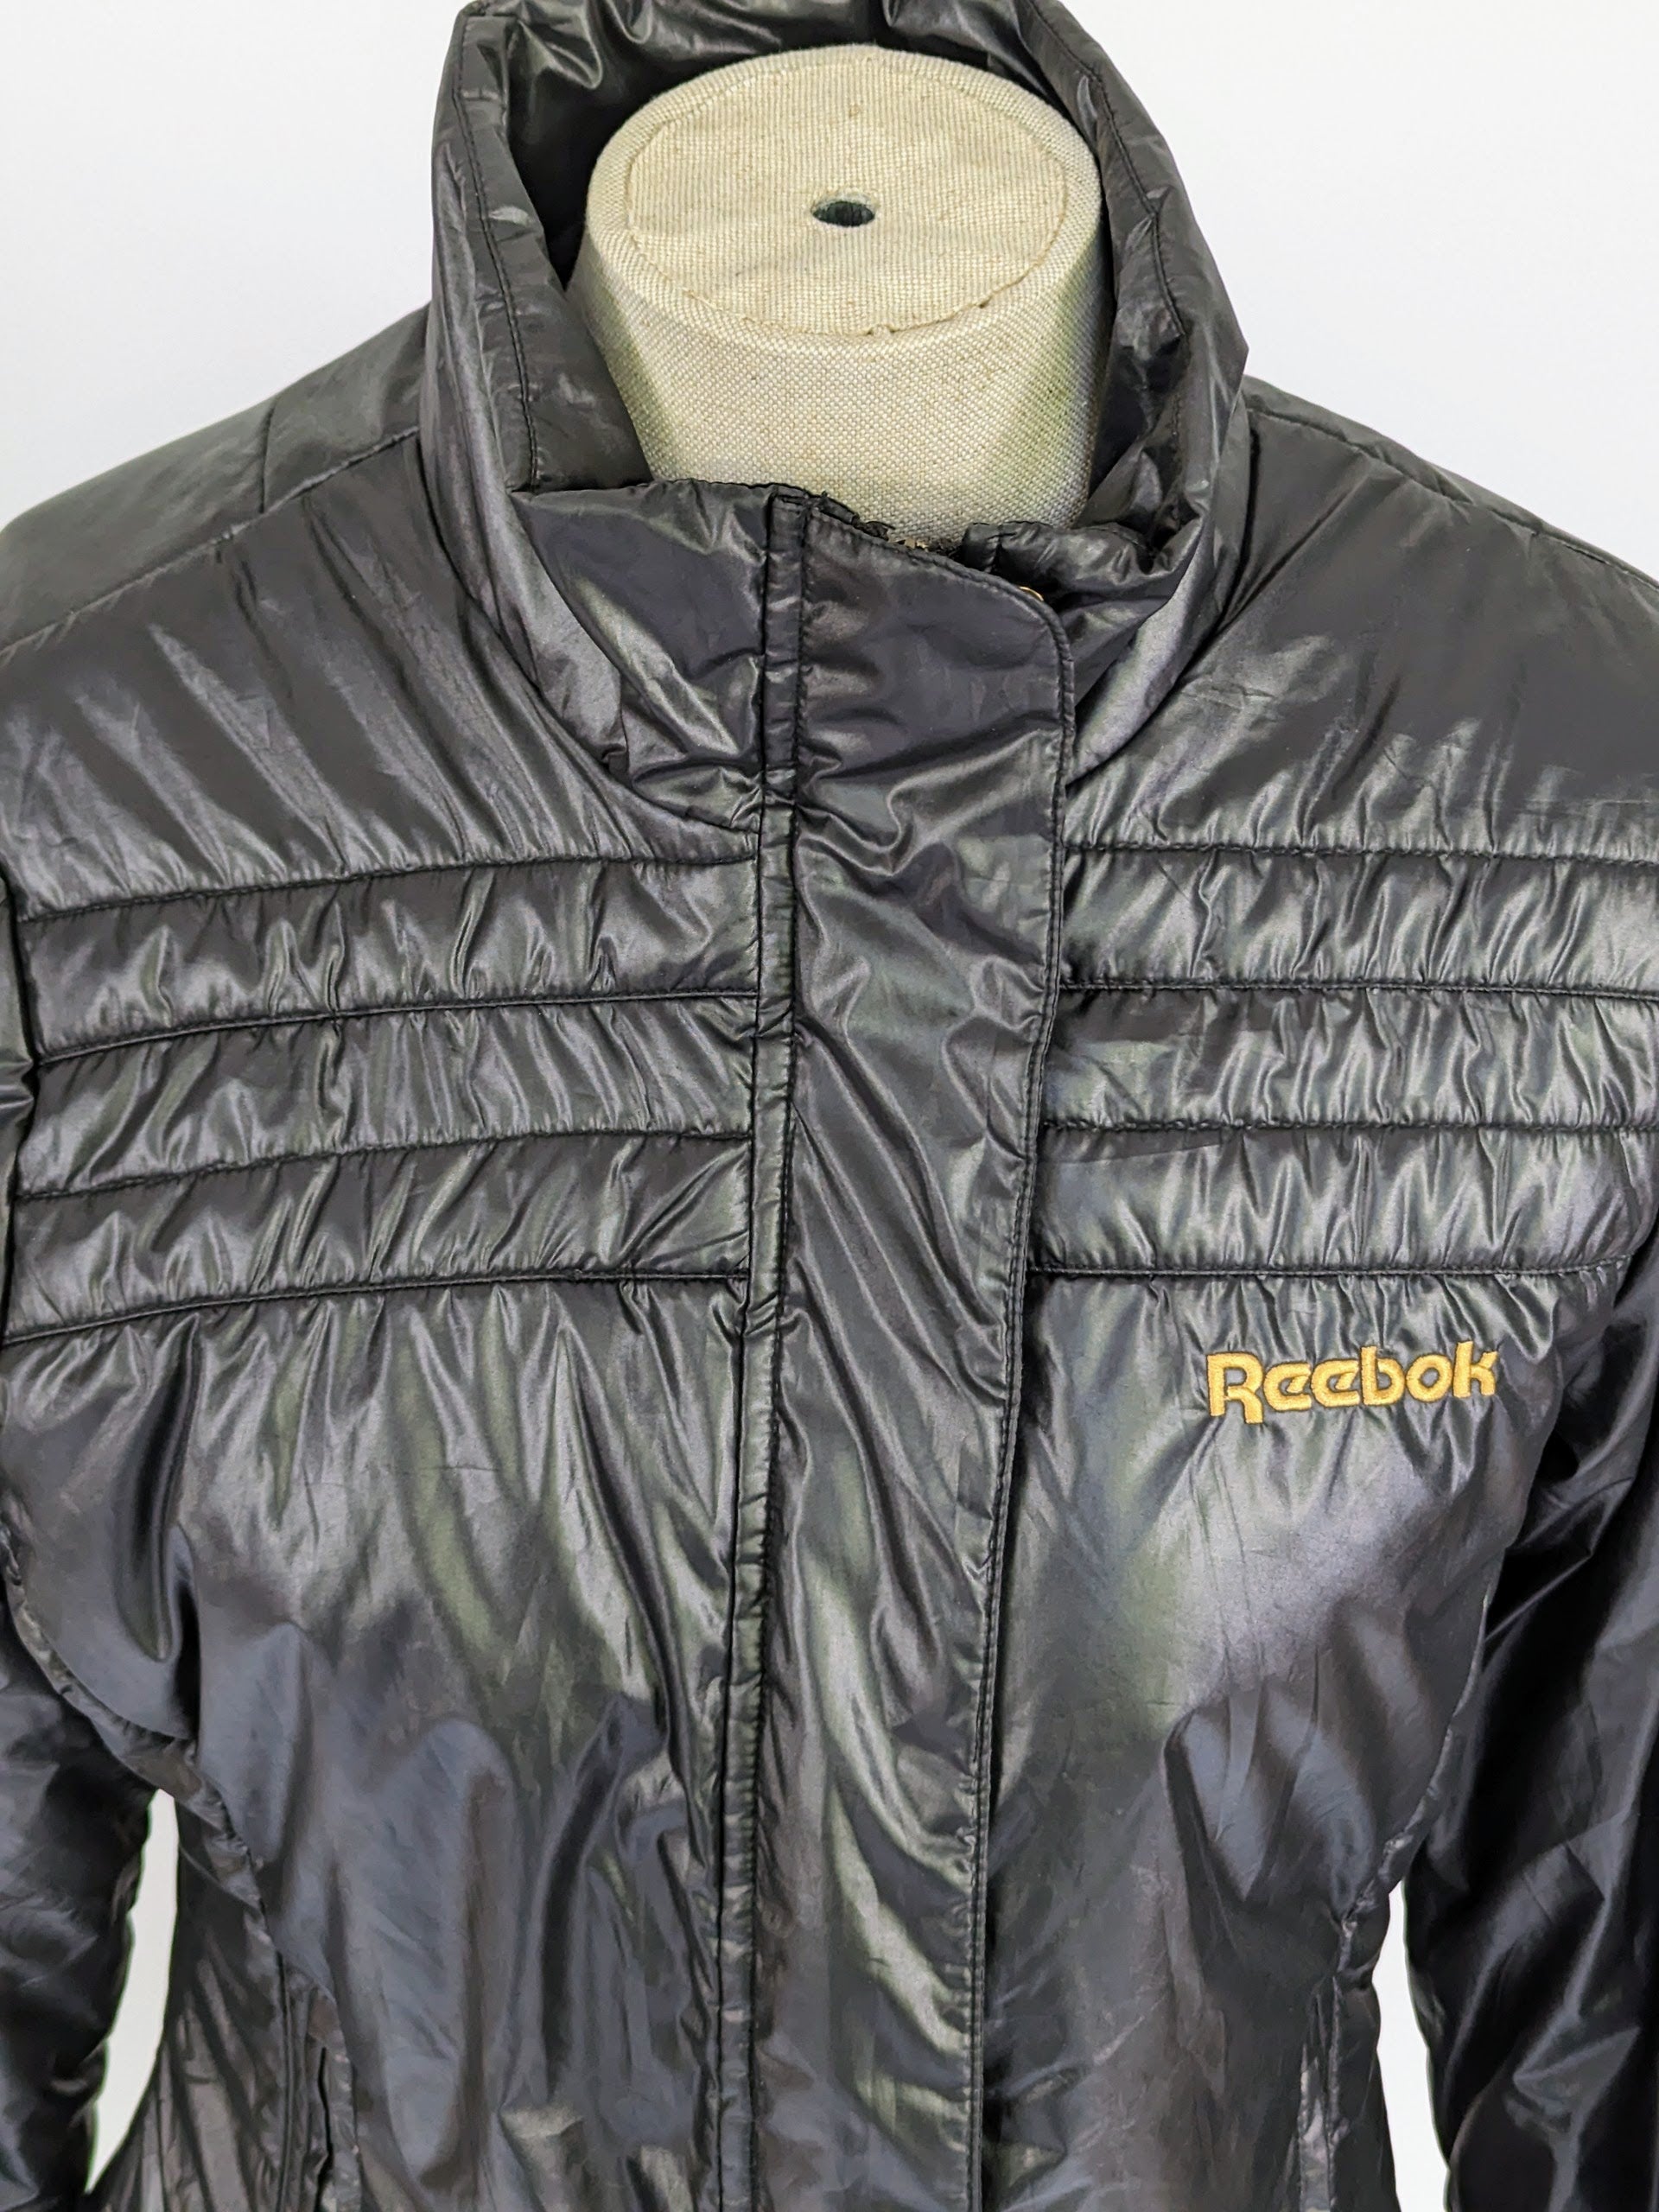 close up on top of black reebok jacket with panelled stitching to the top